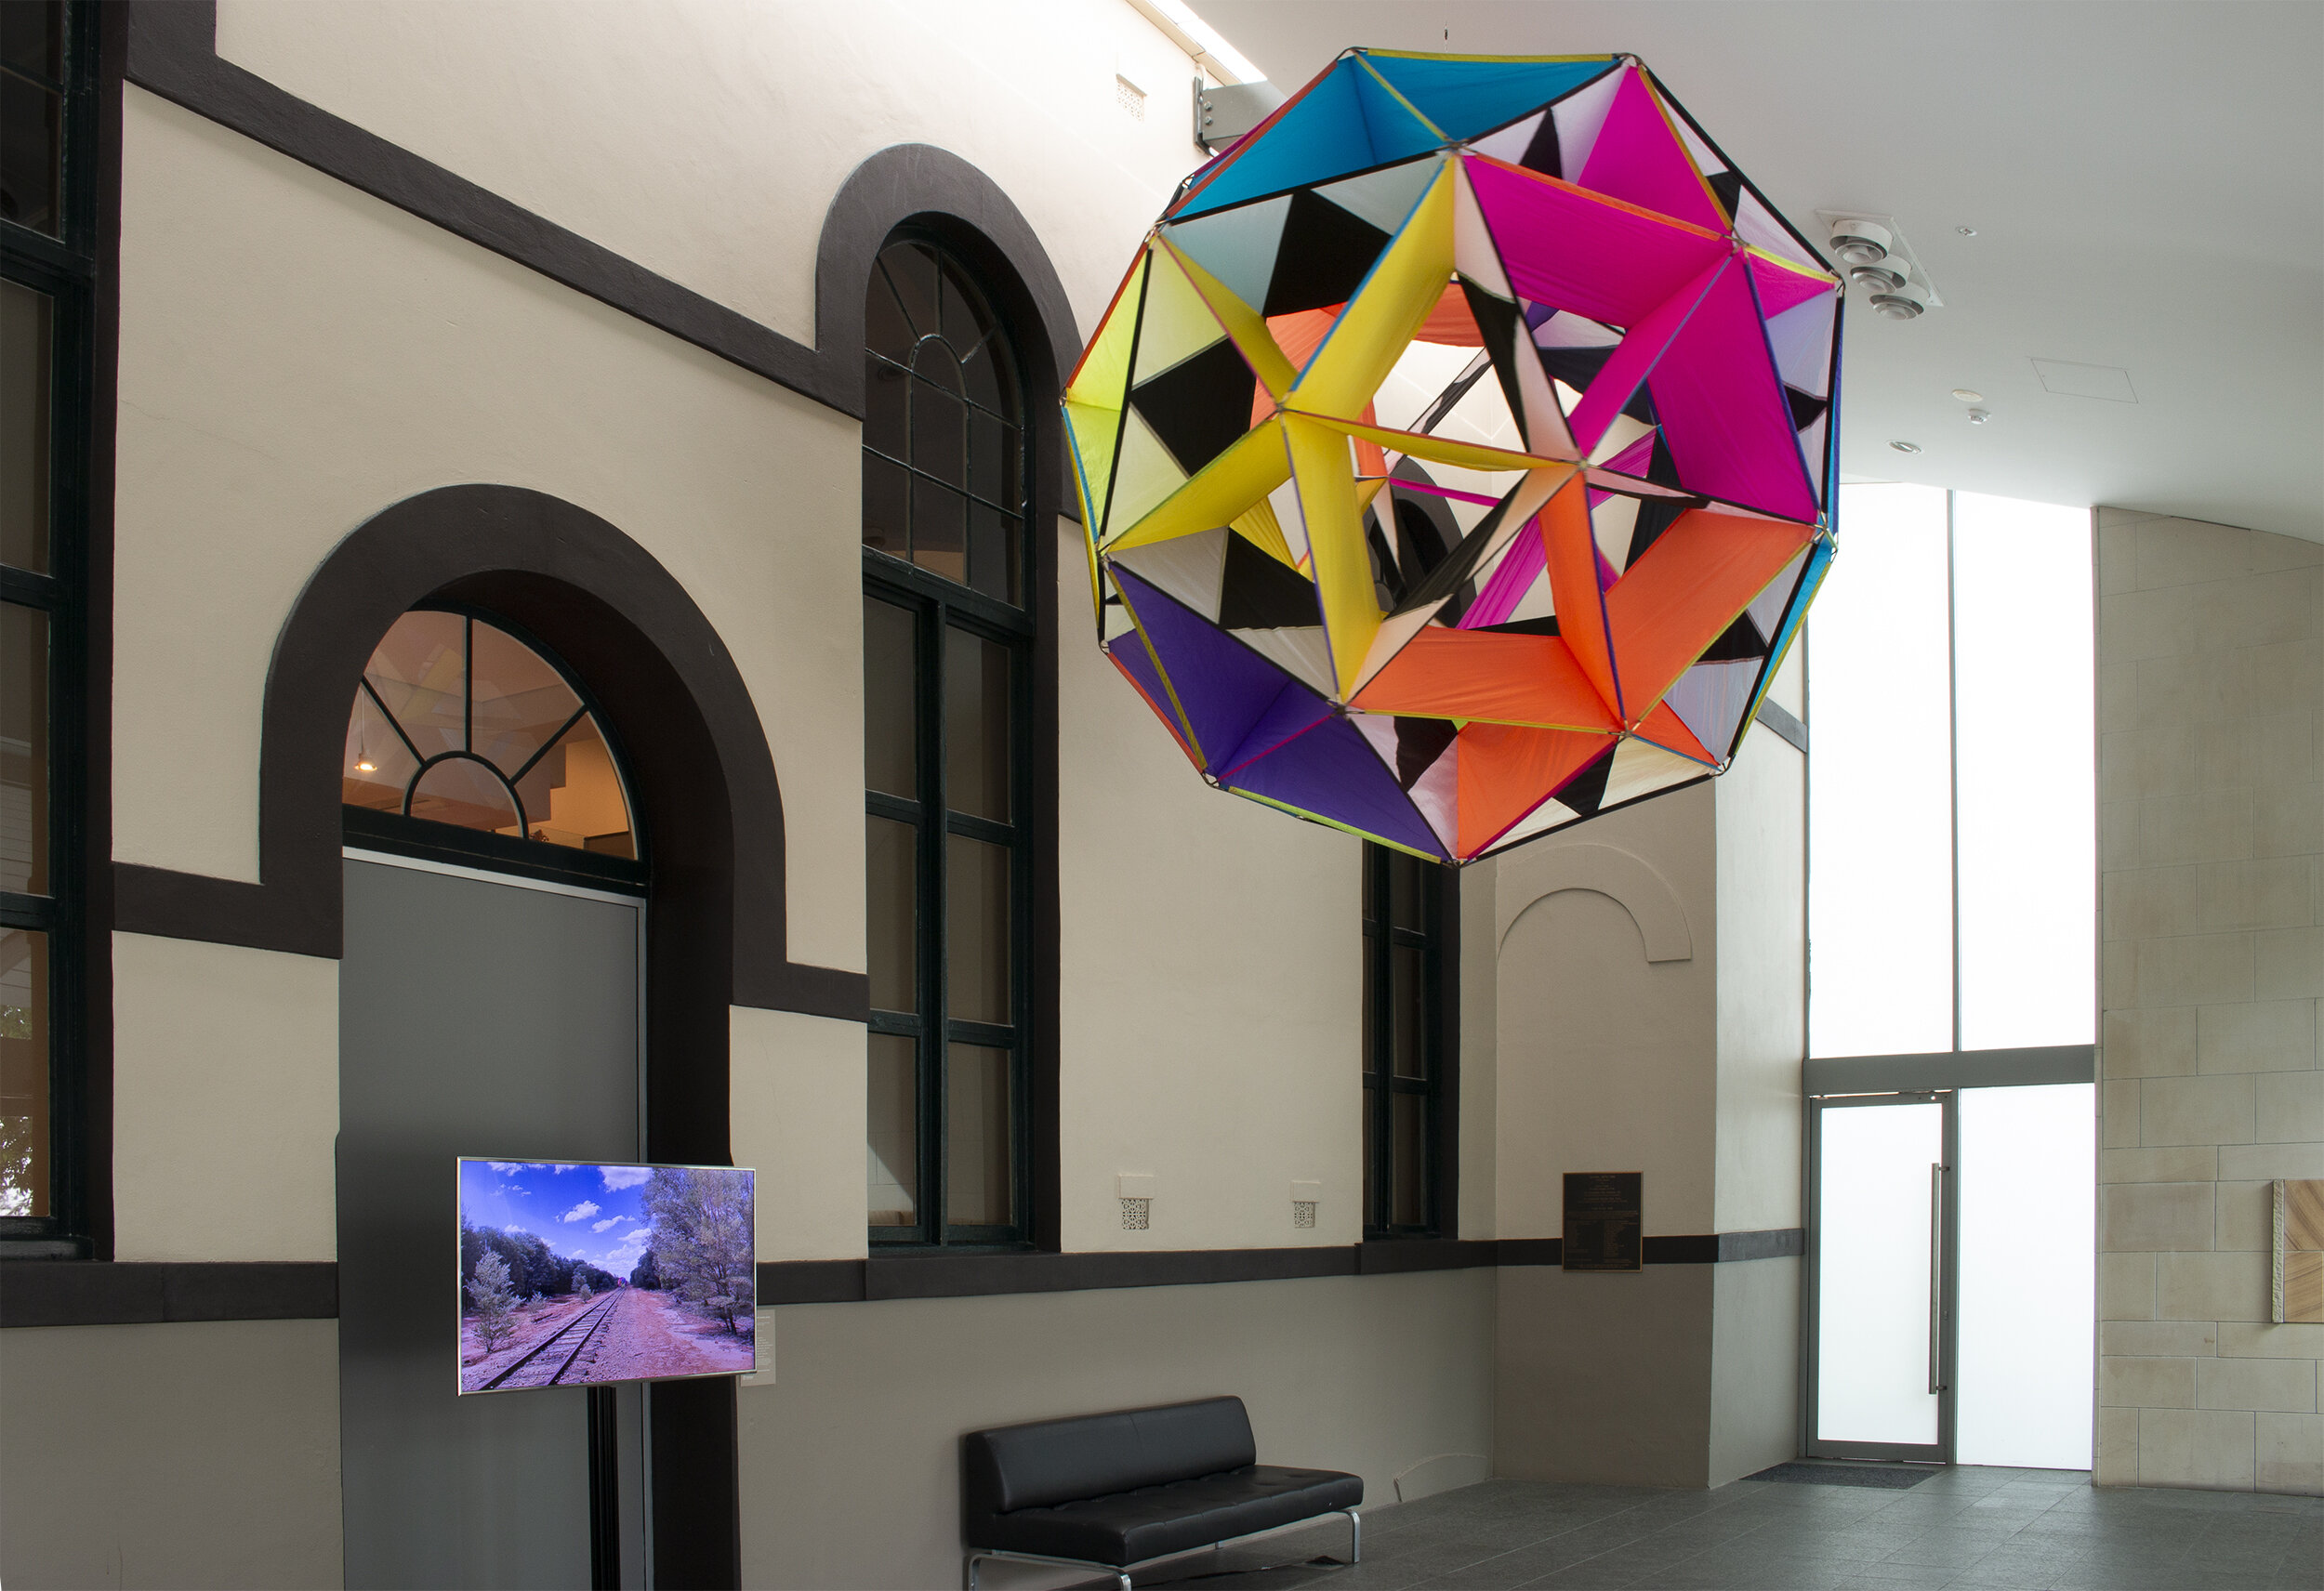   Lincoln Austin: The Space Between Us , exhibition installation view, Ipswich Art Gallery, 2021; image courtesy Ipswich Art Gallery 